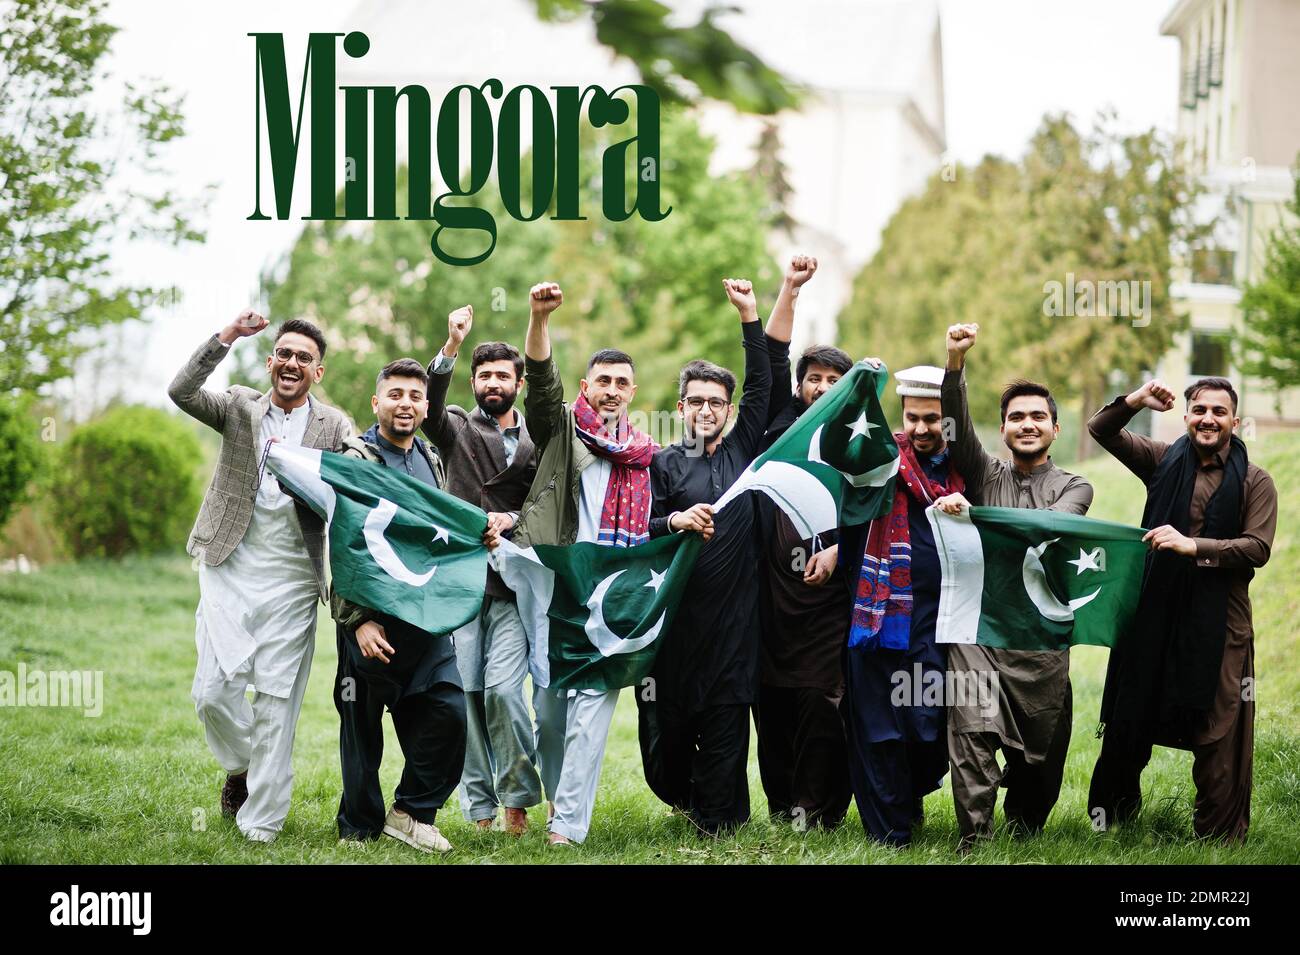 Mingora city. Group of pakistani man wearing traditional clothes with national flags. Biggest cities of Pakistan concept. Stock Photo